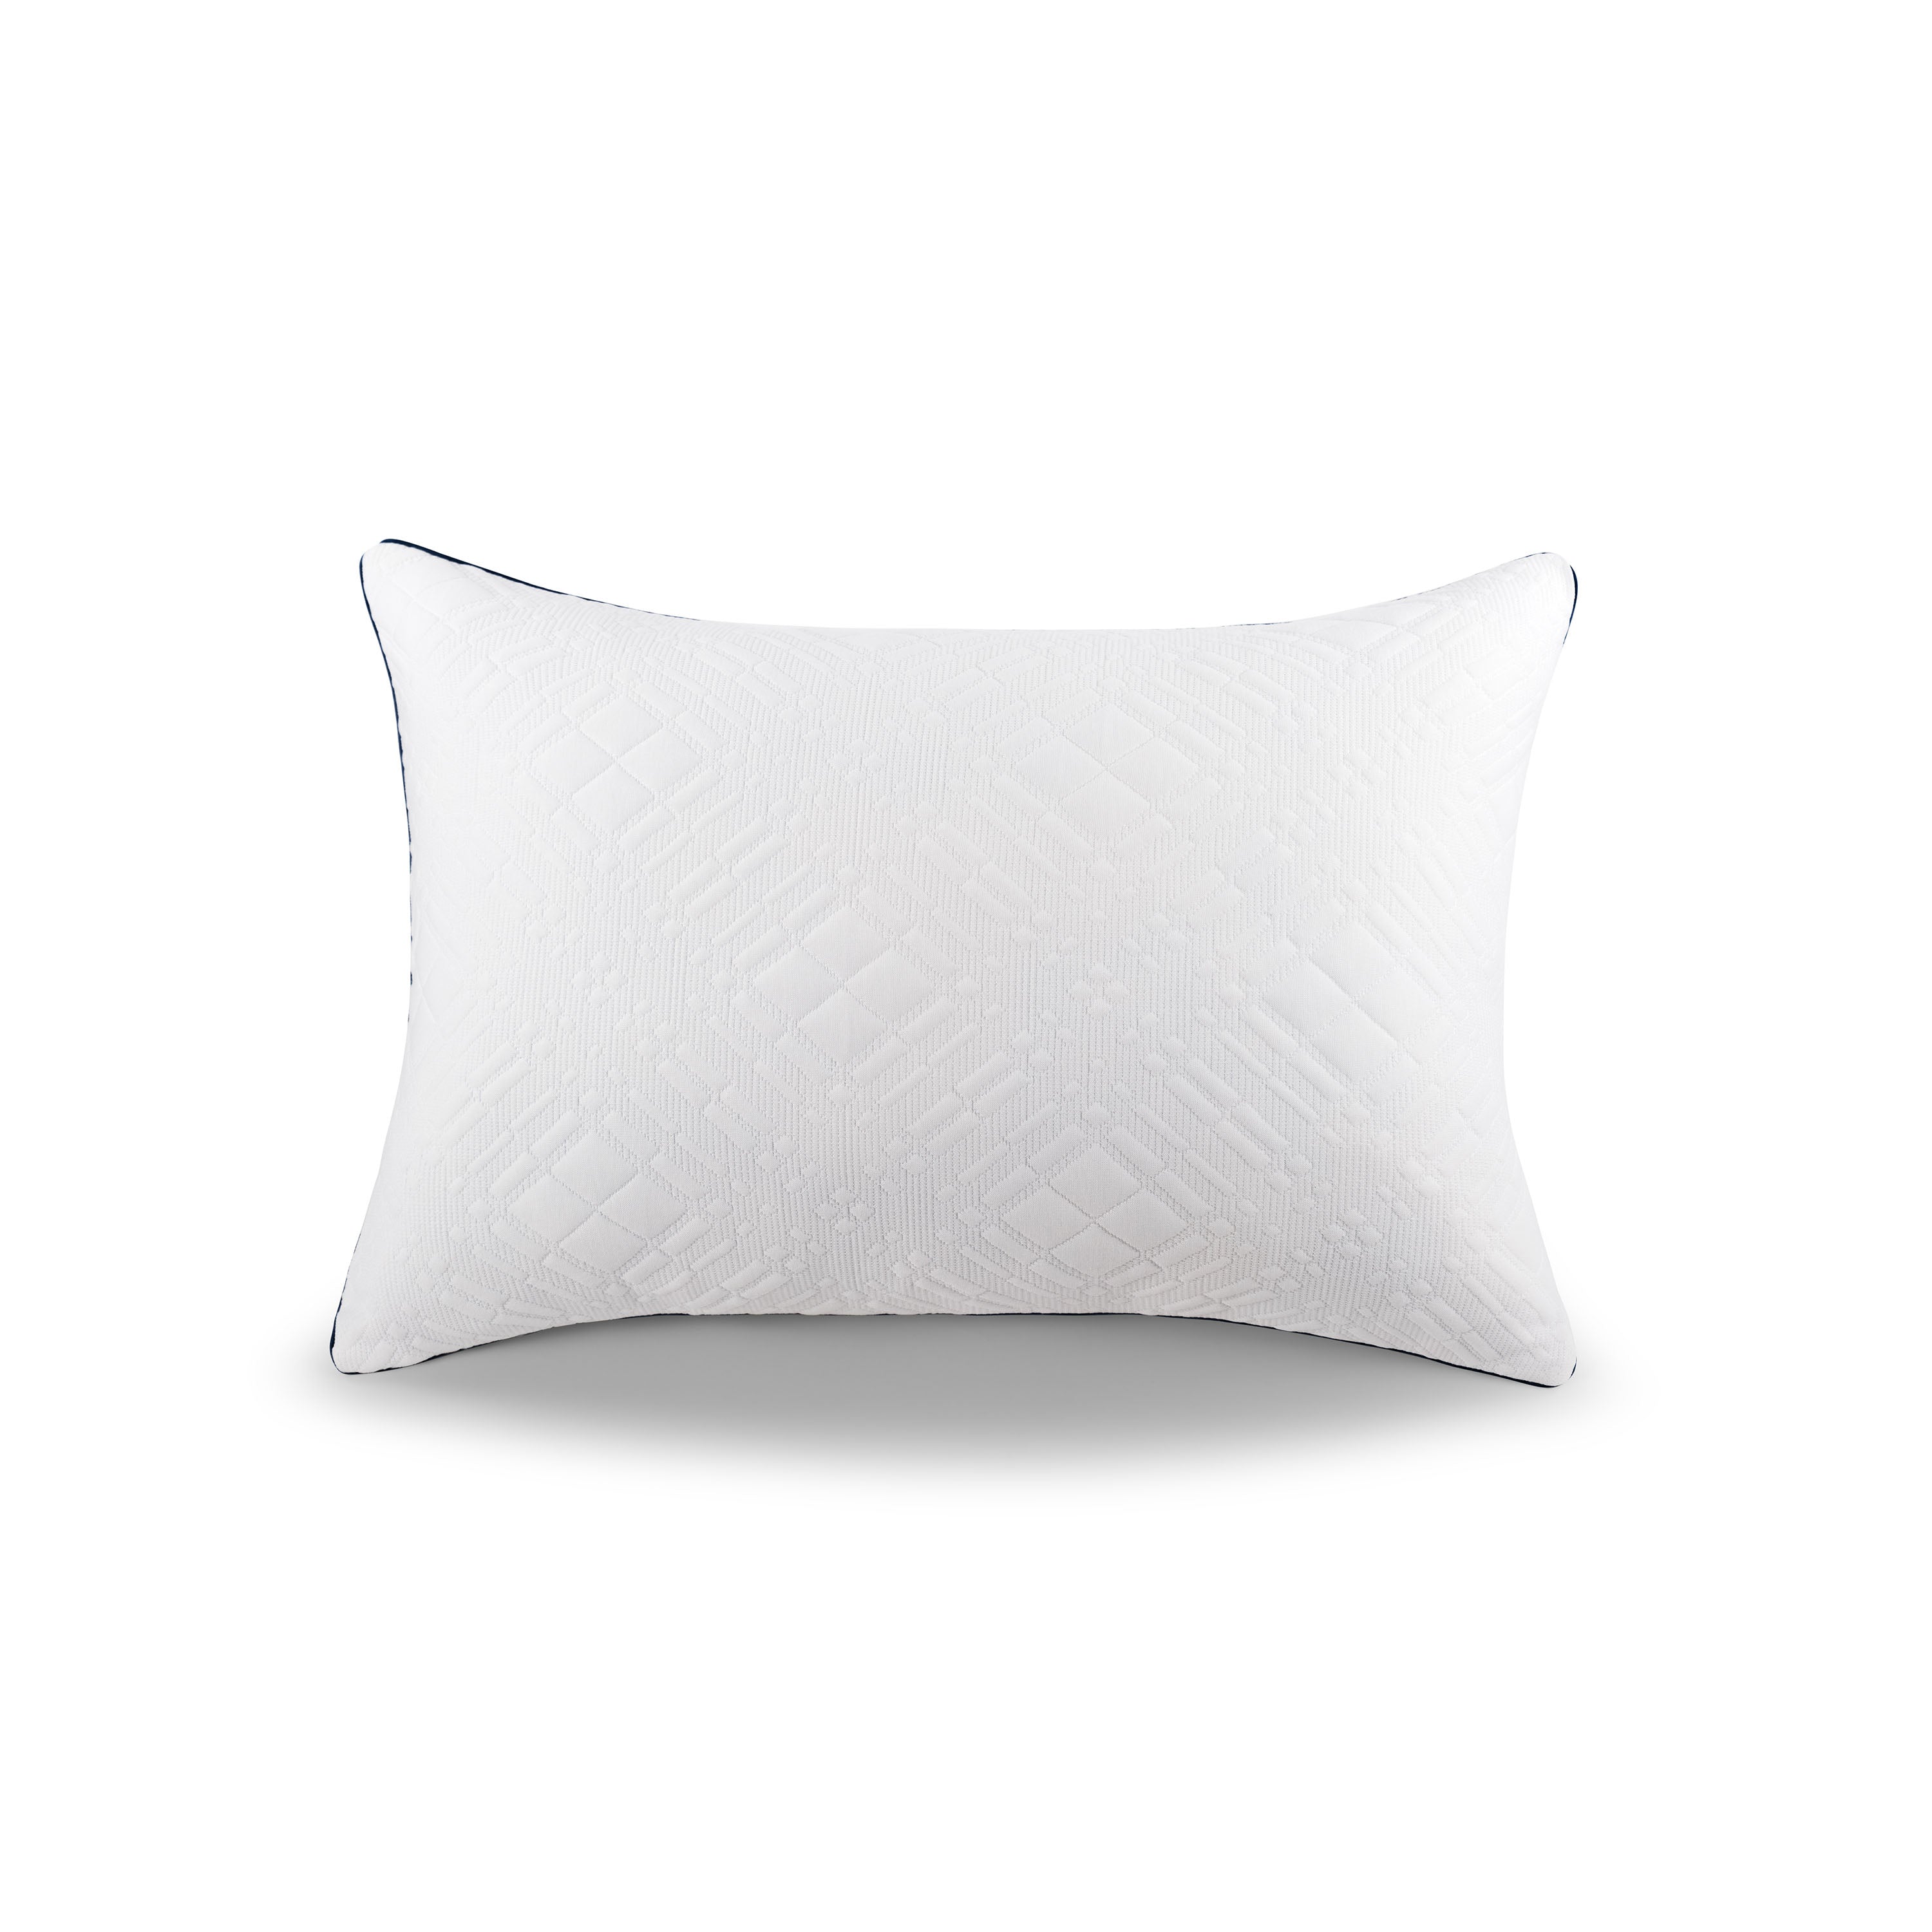 Awake Refreshed Memory Foam Cluster Pillows | 2-Pack